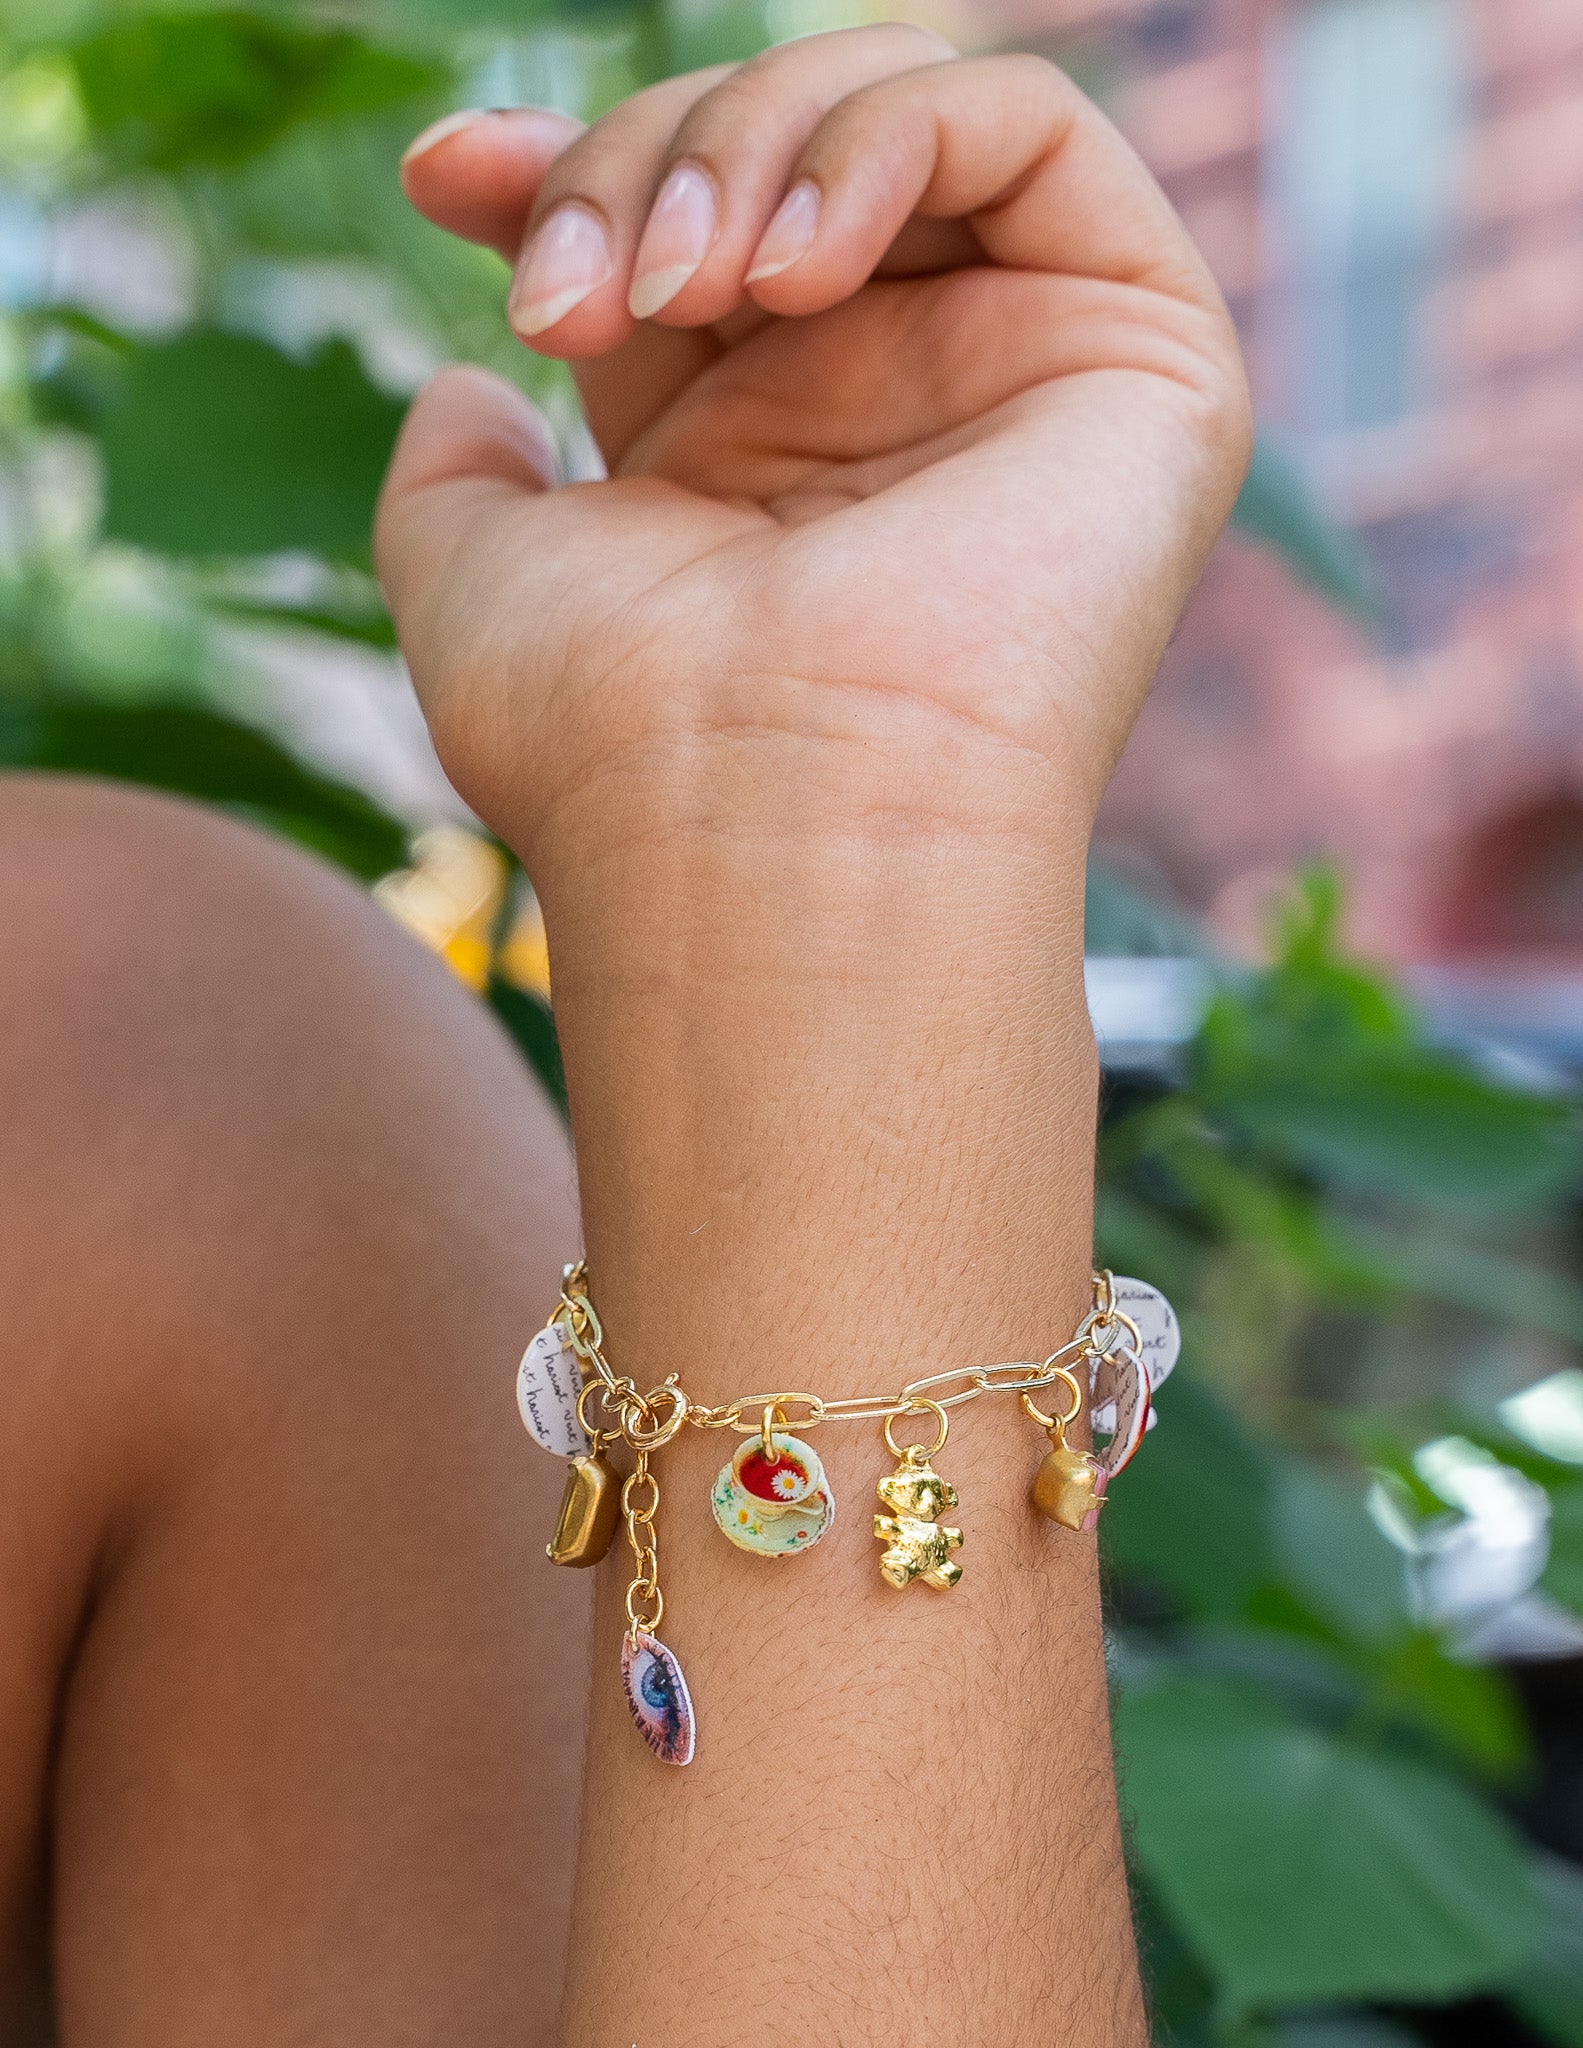 Rolo Luxury Bracelet with Pasta Charms in Sterling Silver and Enamel |  L'Italo-Americano – Italian American bilingual news source